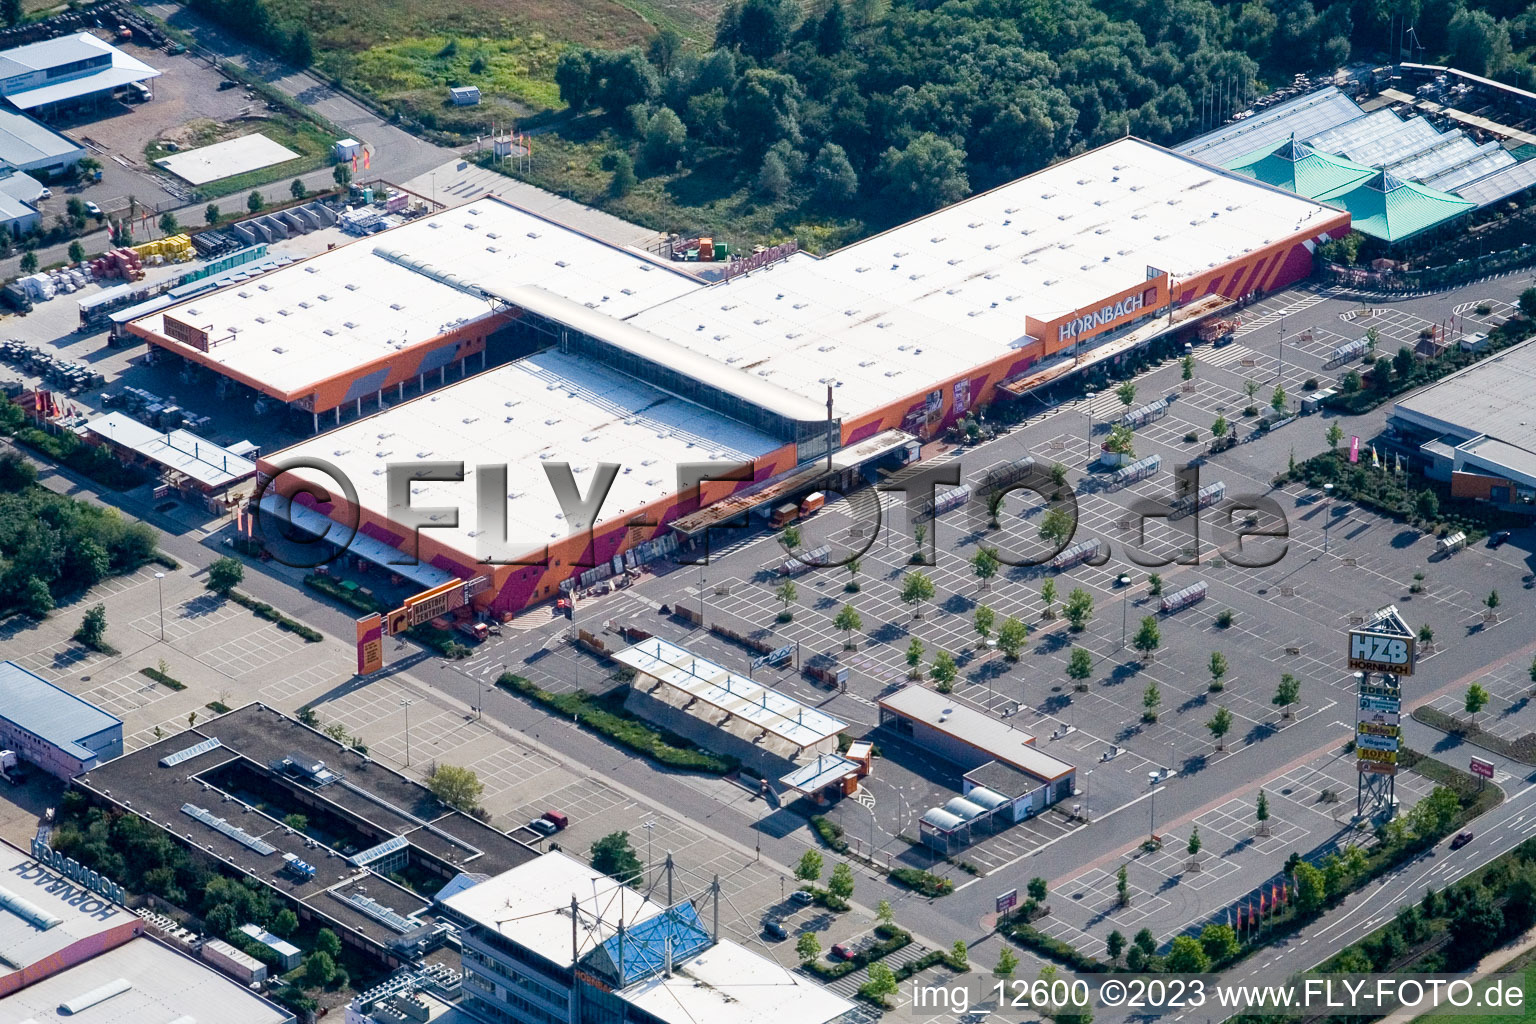 Aerial photograpy of Hornbach hardware store in the Bruchwiesenstr industrial area in Bornheim in the state Rhineland-Palatinate, Germany